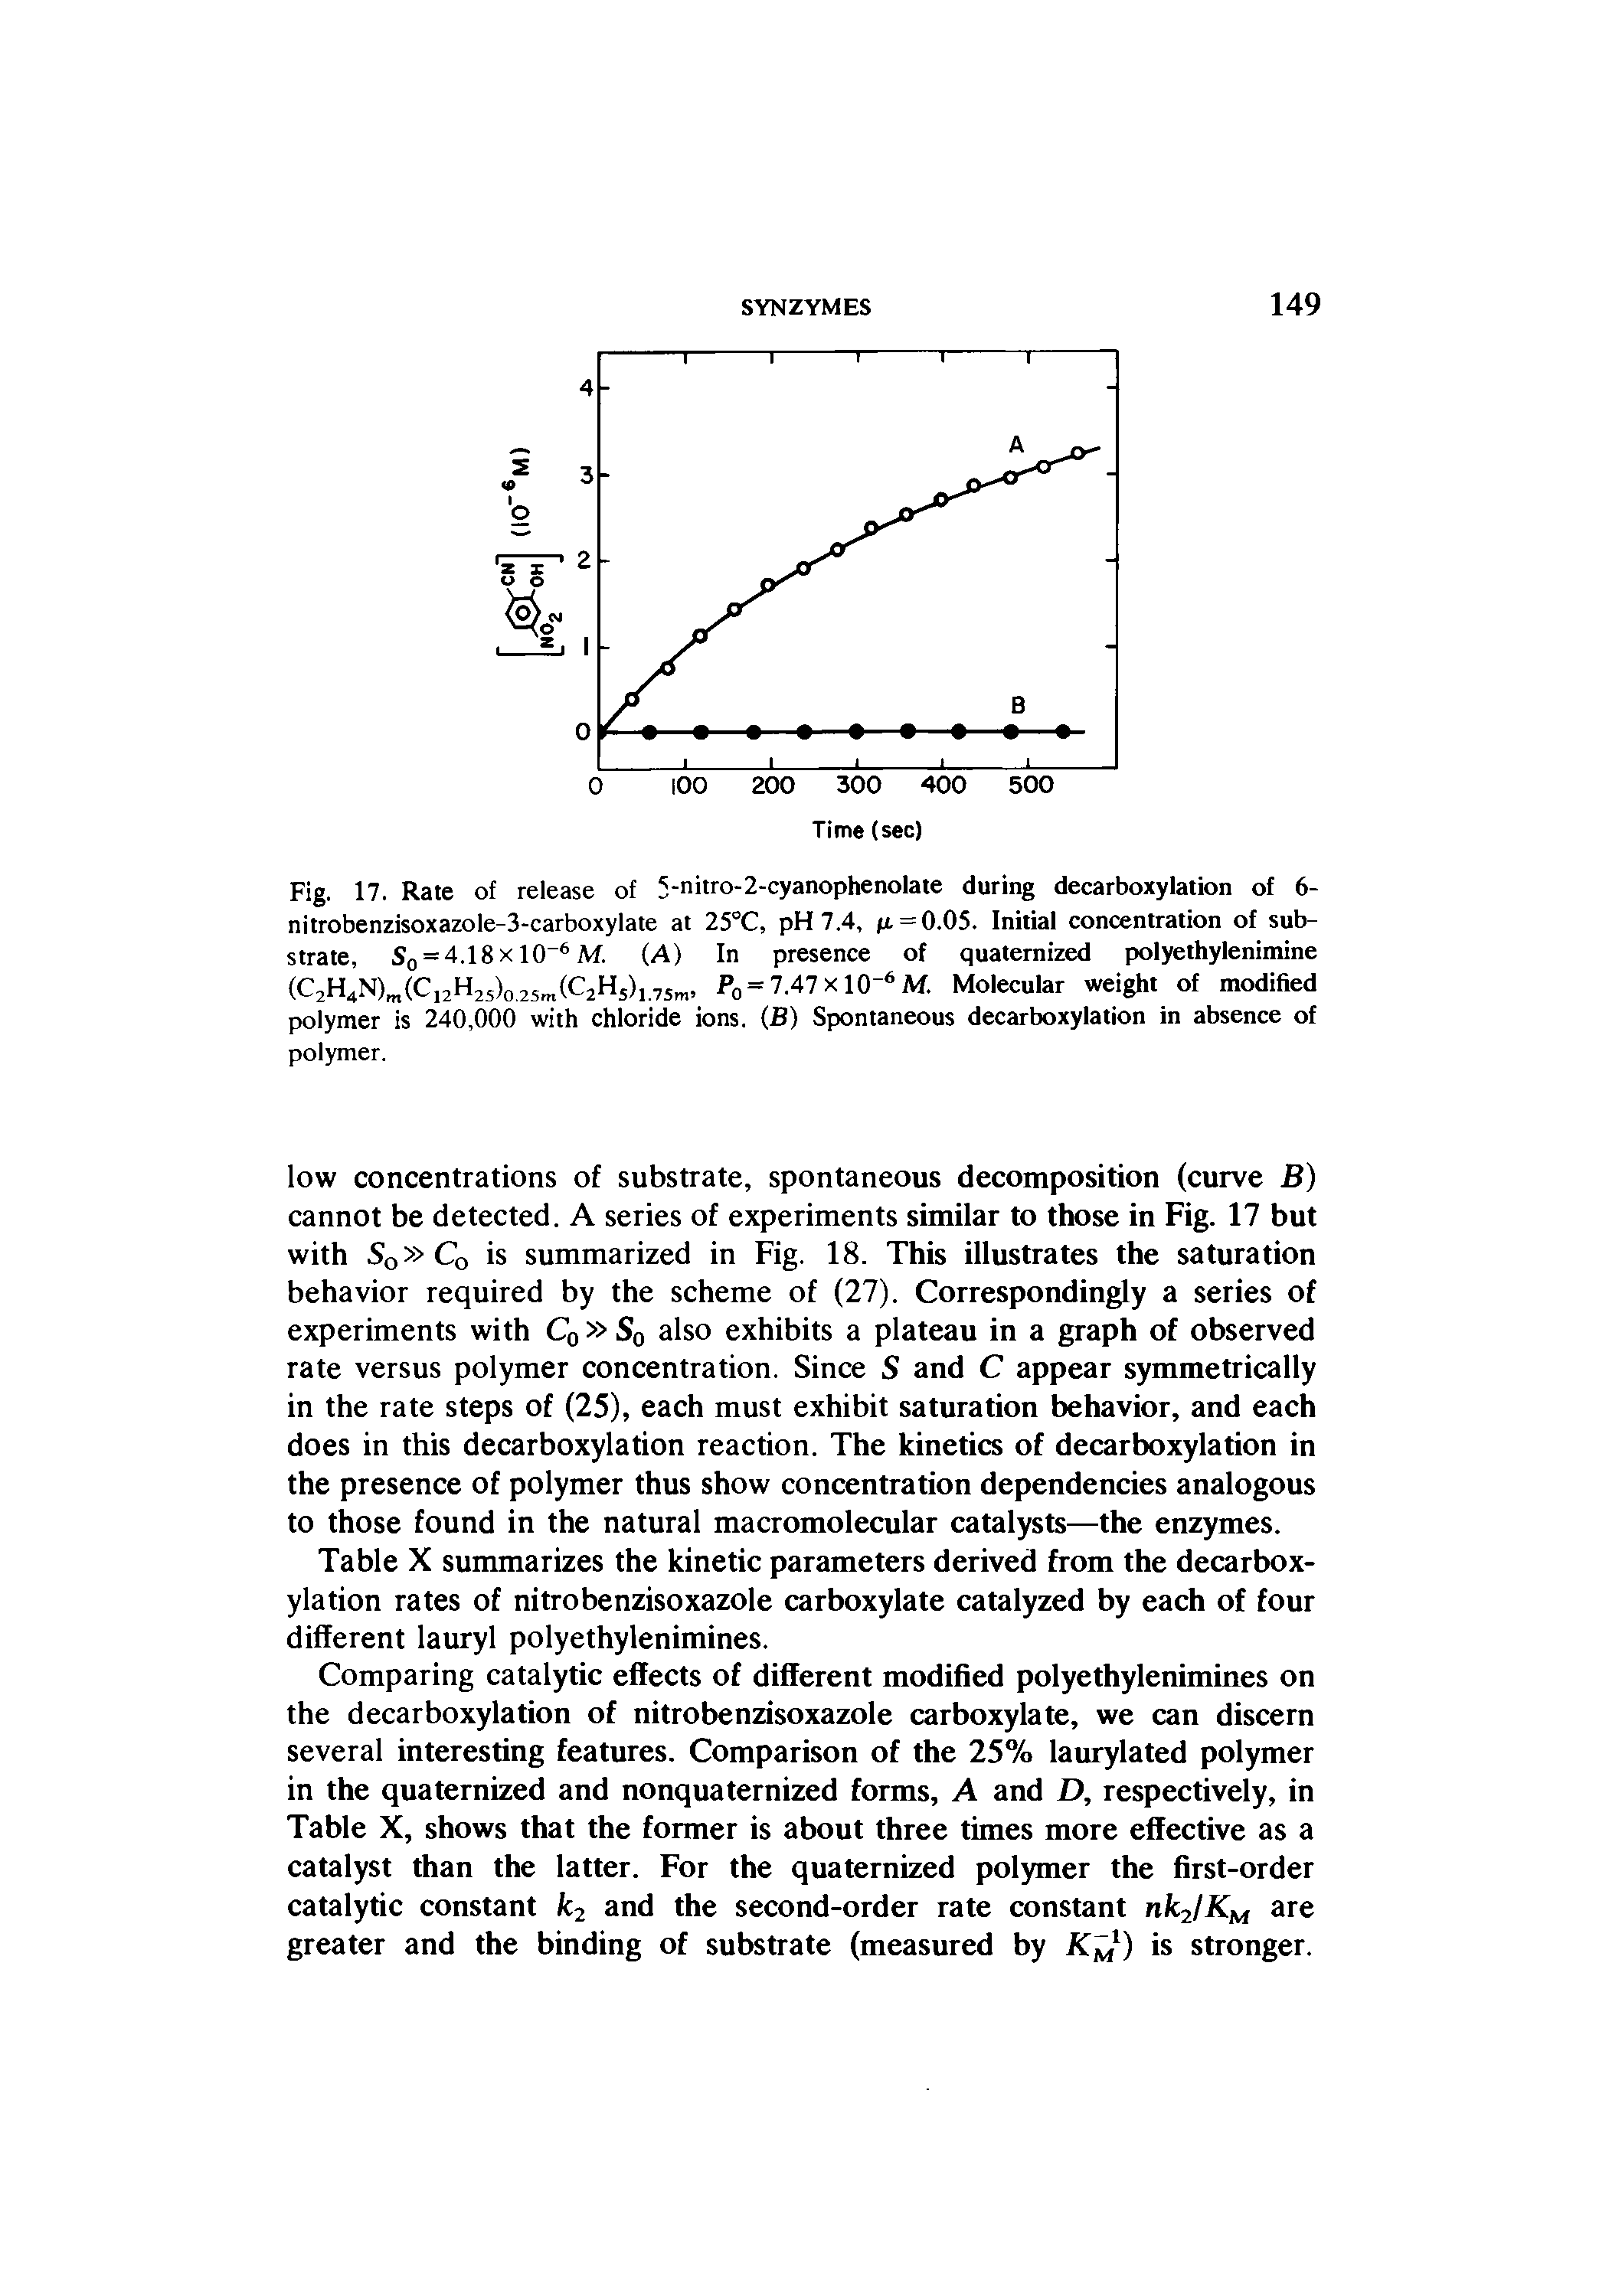 Fig. 17. Rate of release of 5-nitro-2-cyanophenolate during decarboxylation of 6-nitrobenzisoxazole-3-carboxylate at 25°C, pH 7.4, p. = 0.05. Initial concentration of substrate, So = 4.18xl0-6M (A) In presence of quaternized polyethylenimine...